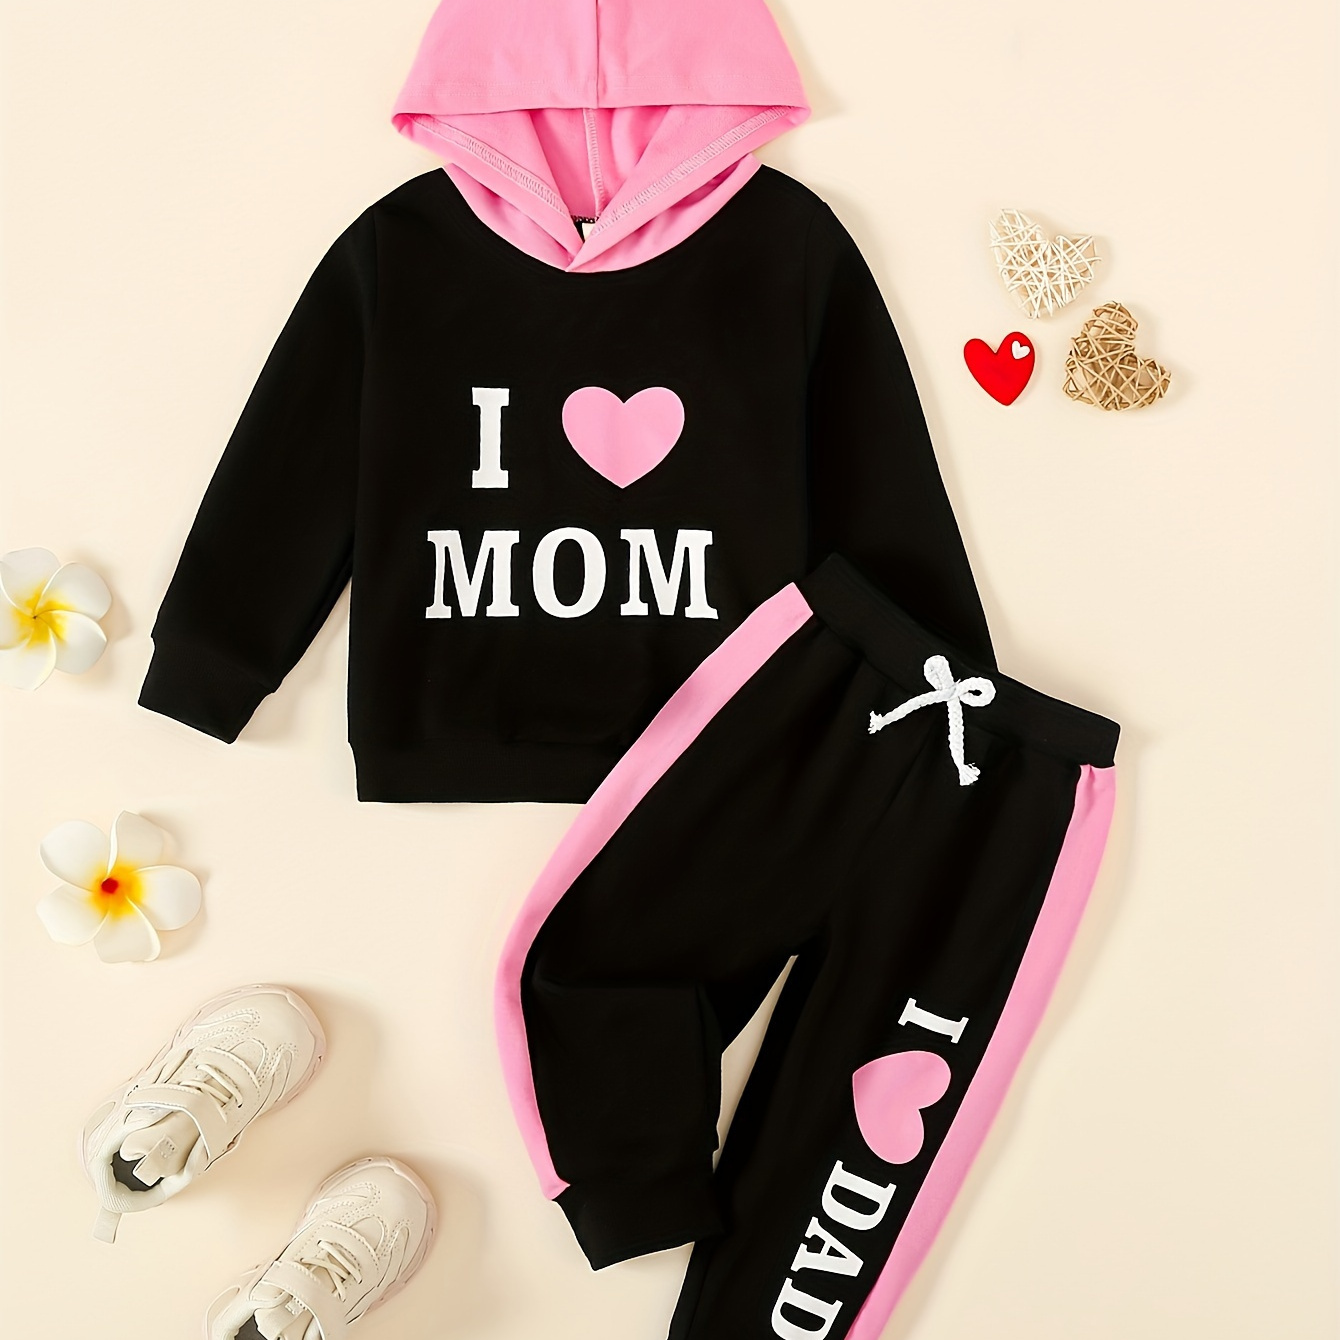 

2pcs Baby Girl Cute Outfits - "i Love Mommy" Letter Print Long Sleeve Hooded Sweatshirt + Jogging Pants Set, Kids Clothes Autumn And Winter